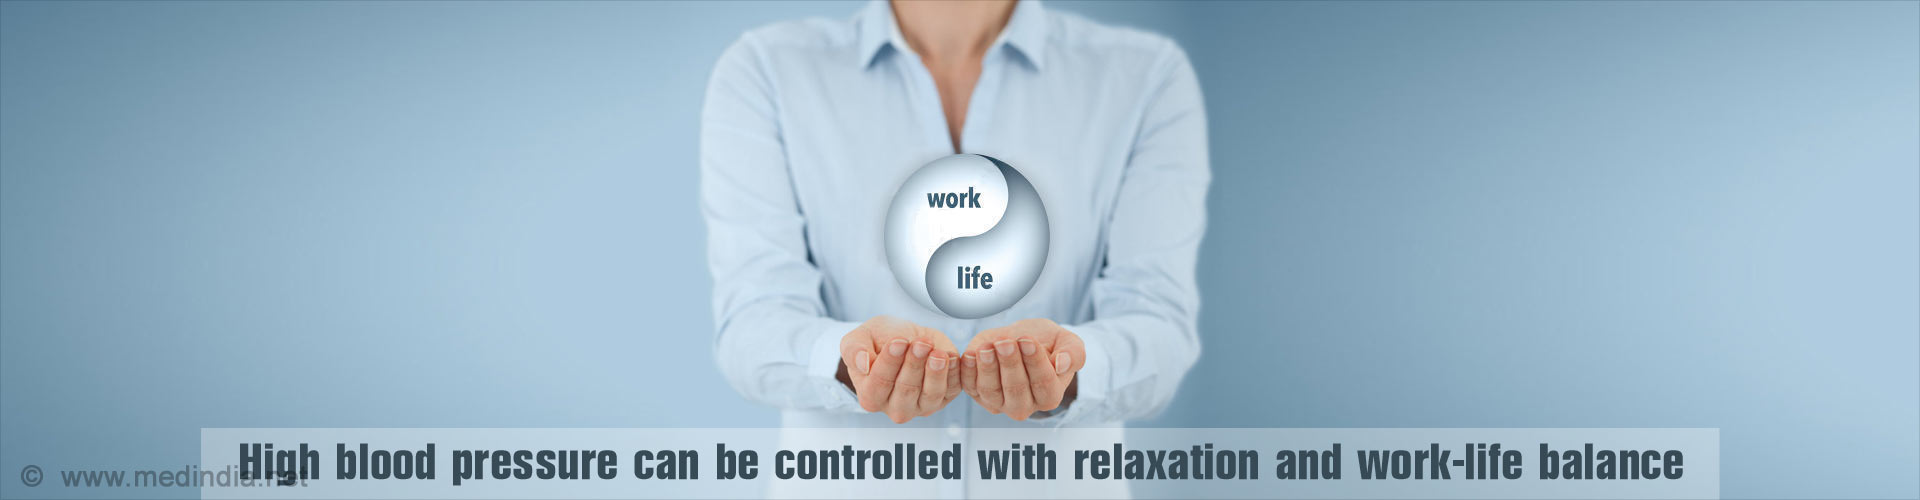 High blood pressure can be controlled with relaxation and work-life balance